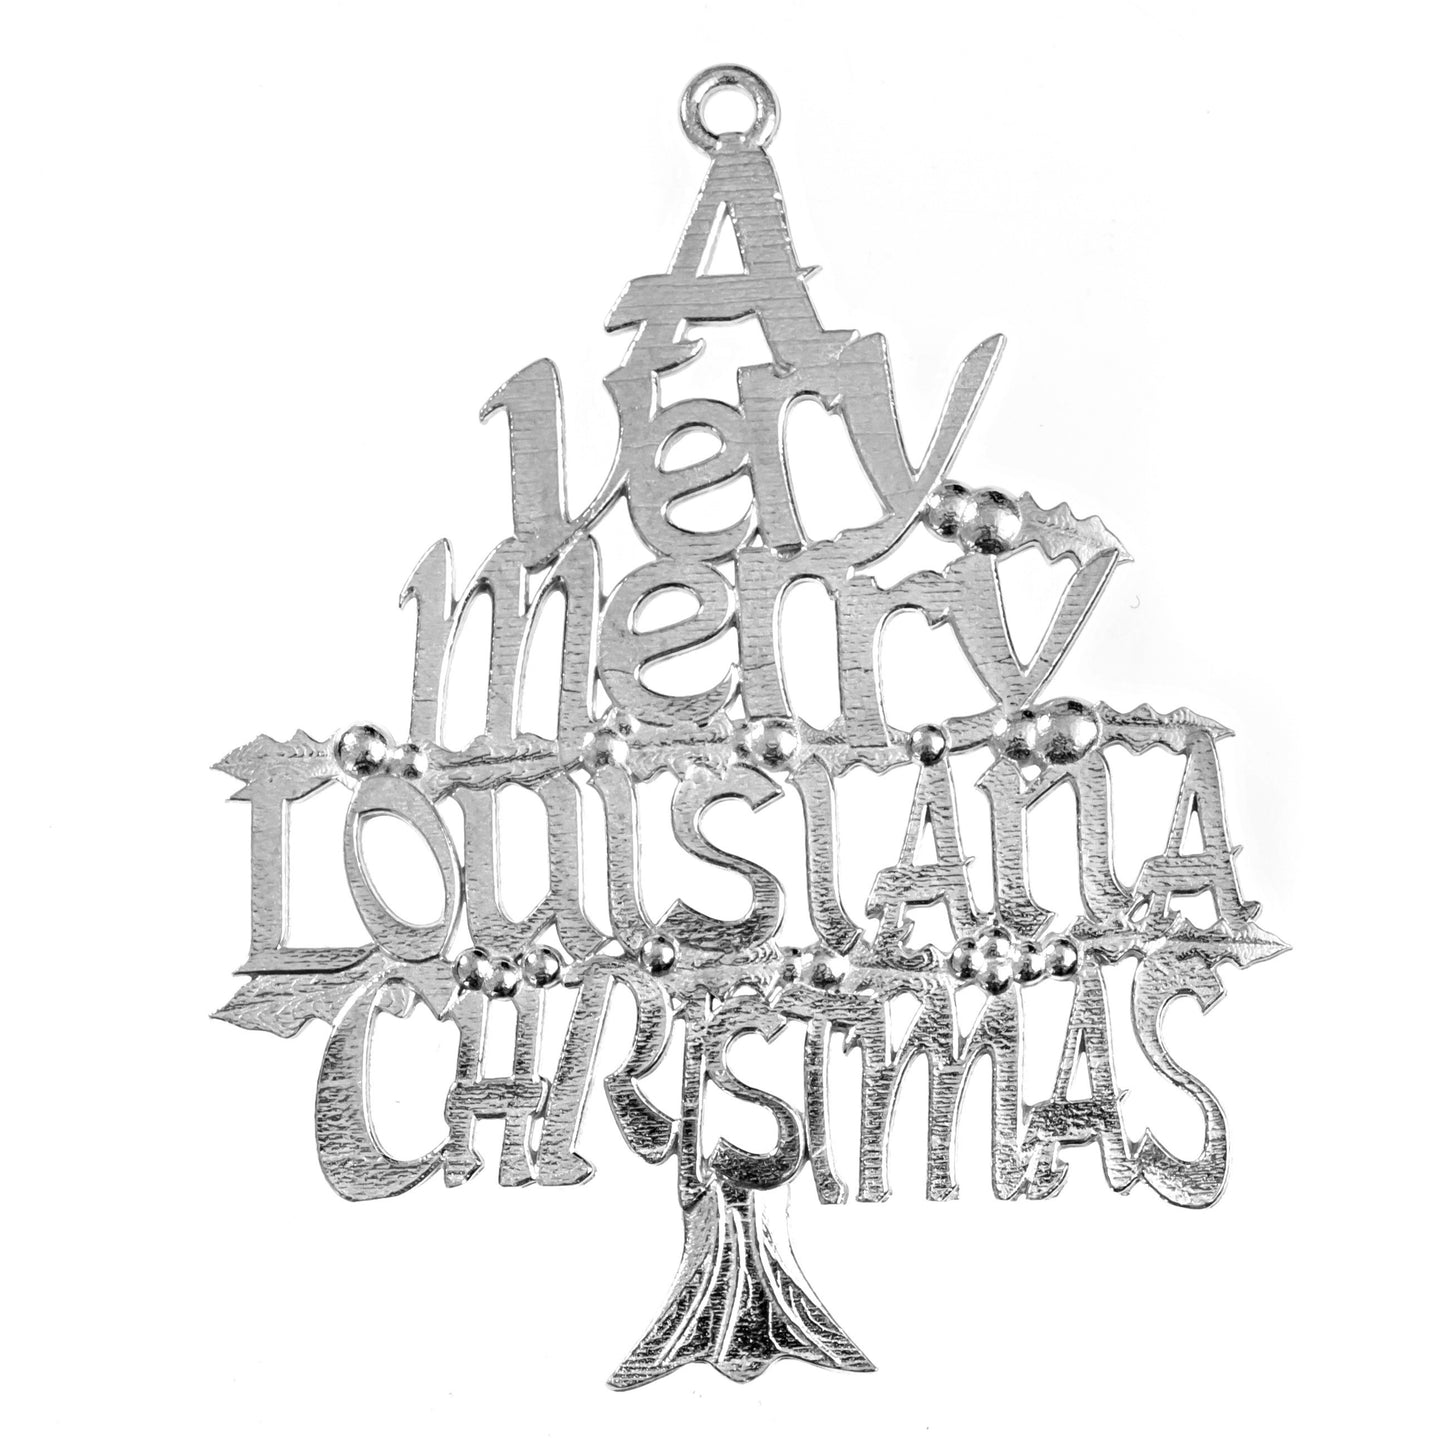 handcrafted pewter homestate ornament Louisiana